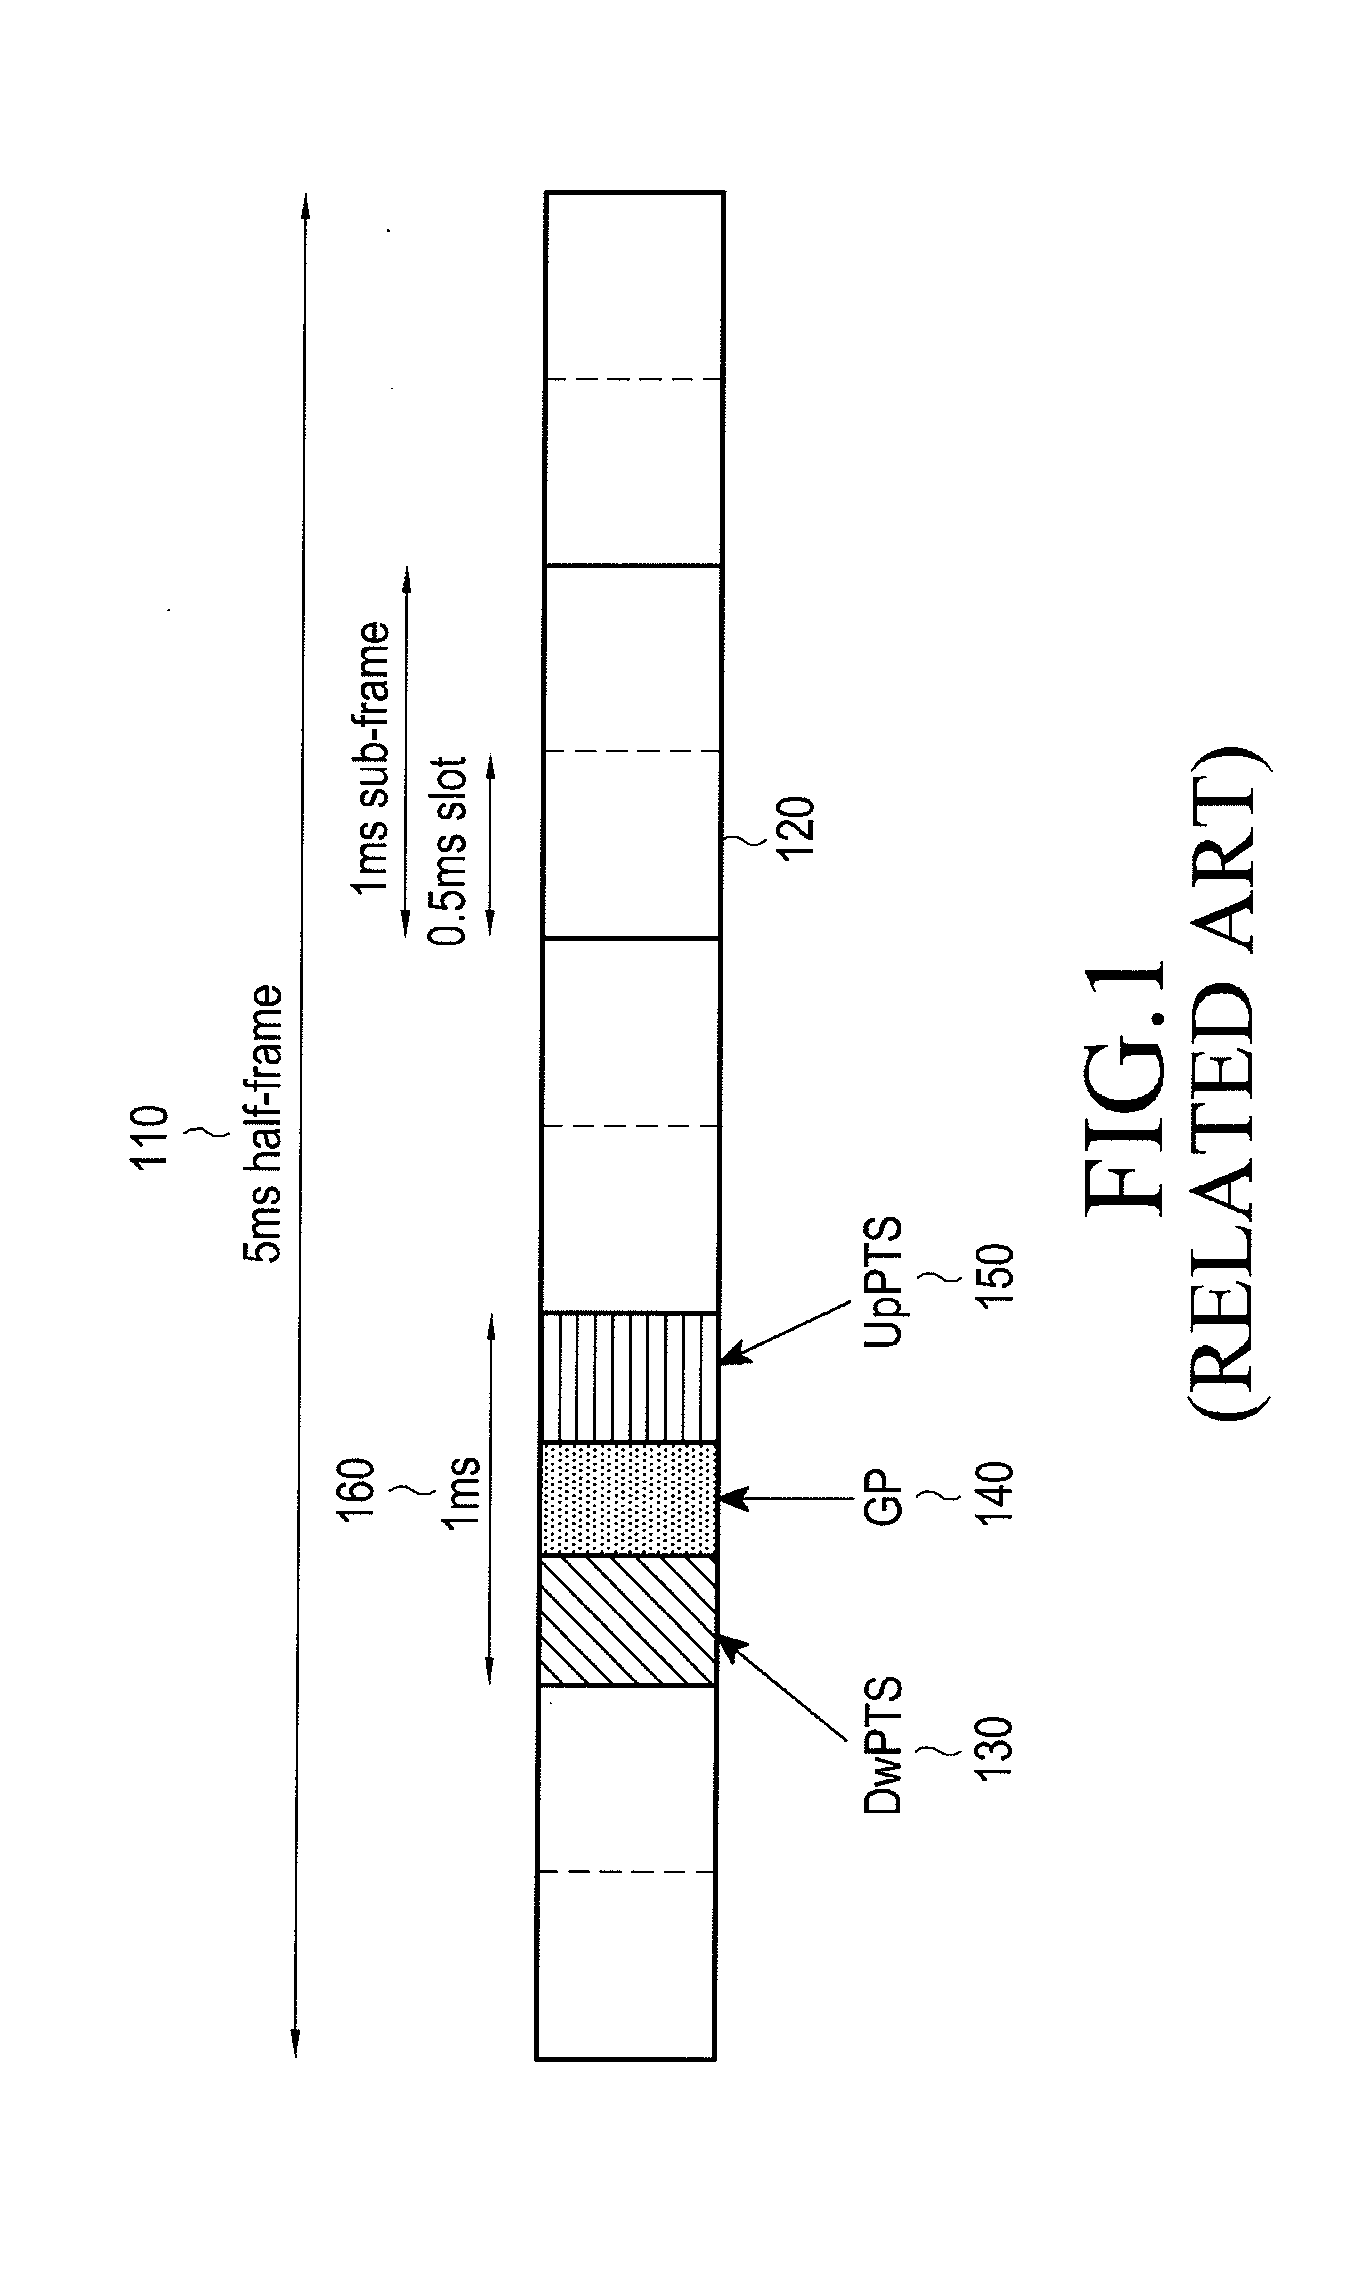 Generation of harq-ack information and power control of harq-ack signals in TDD systems with downlink of carrier aggregation